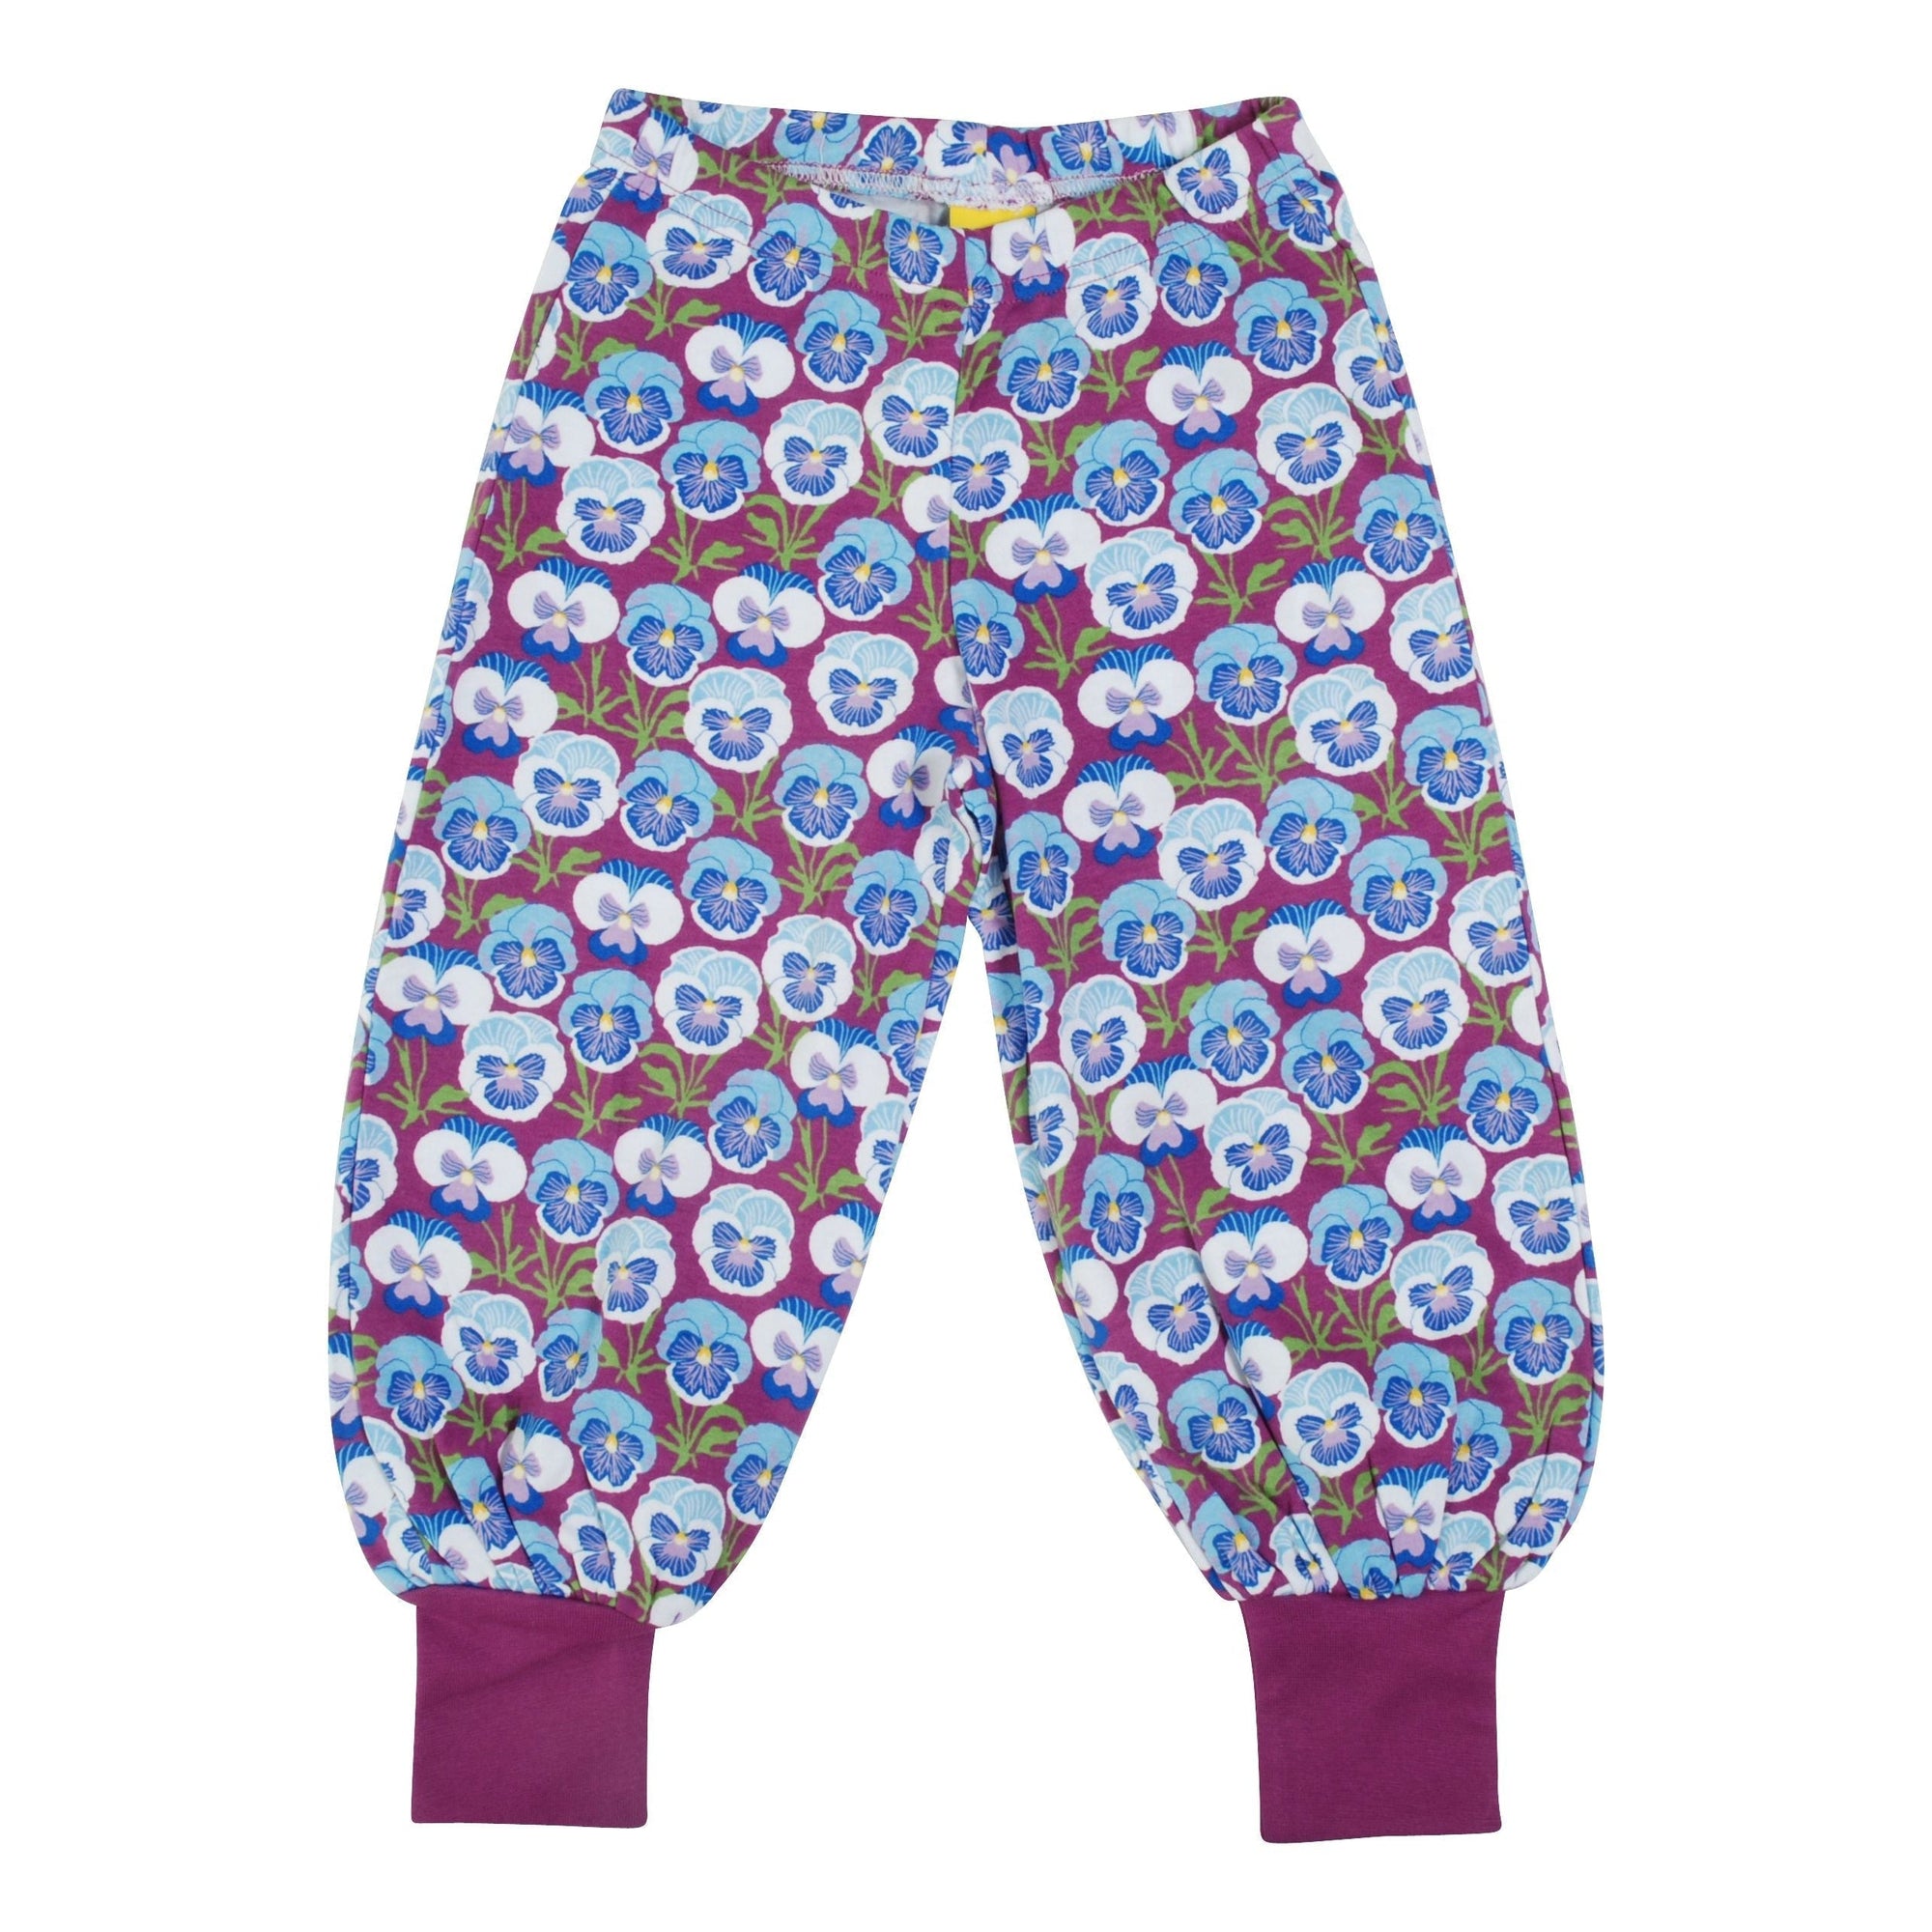 Pansy - Hyacinth Violet Baggy Pants - 1 Left Size 10-12 years-Duns Sweden-Modern Rascals